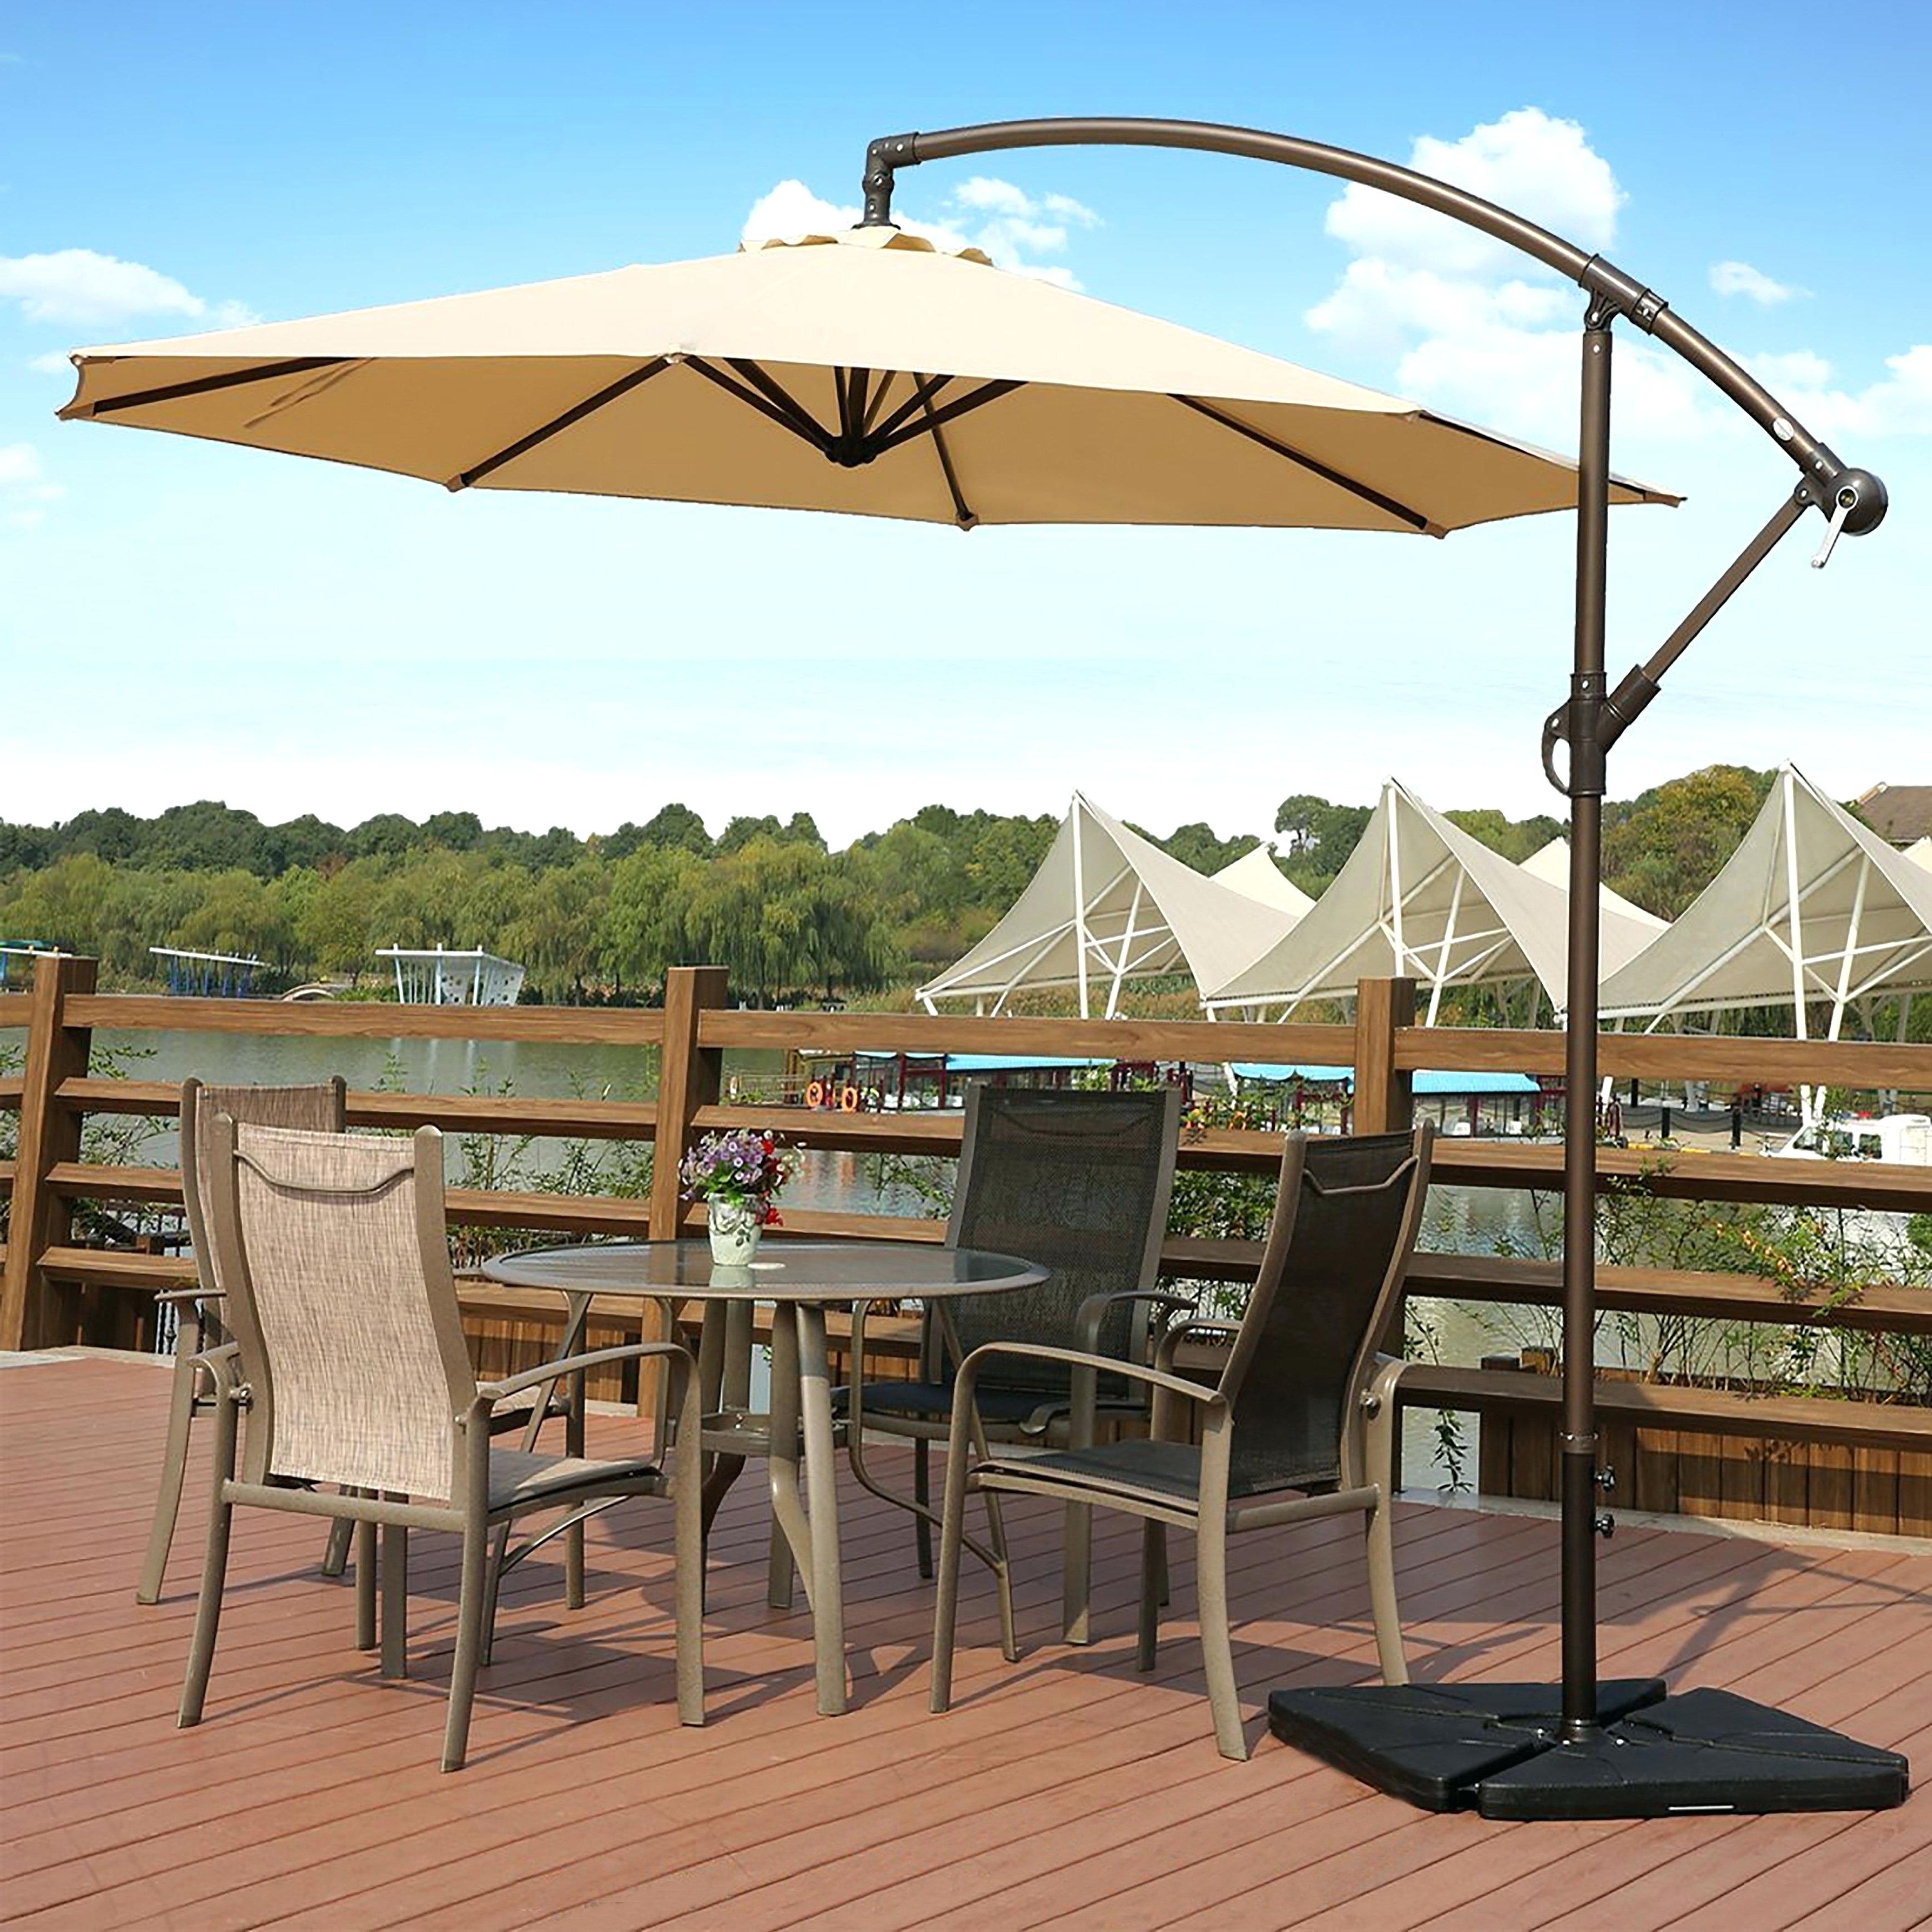 2020 Oversized Umbrellas For Patio – Gtushar (View 19 of 25)